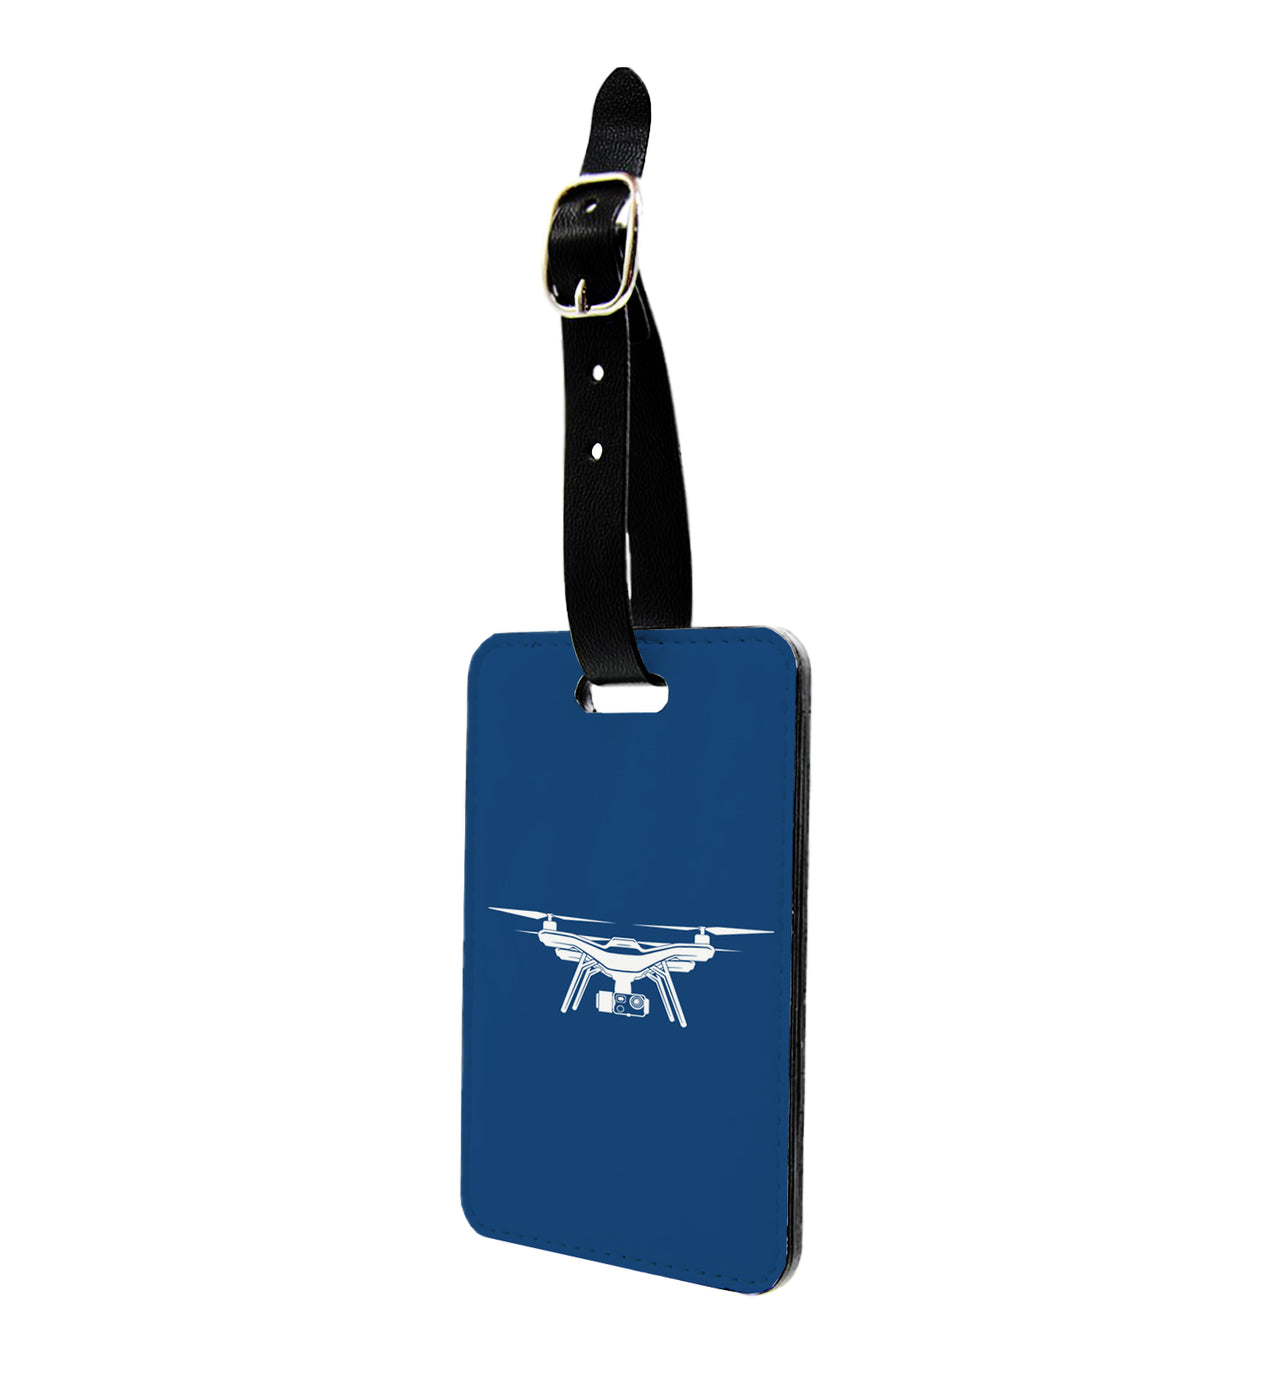 Drone Silhouette Designed Luggage Tag